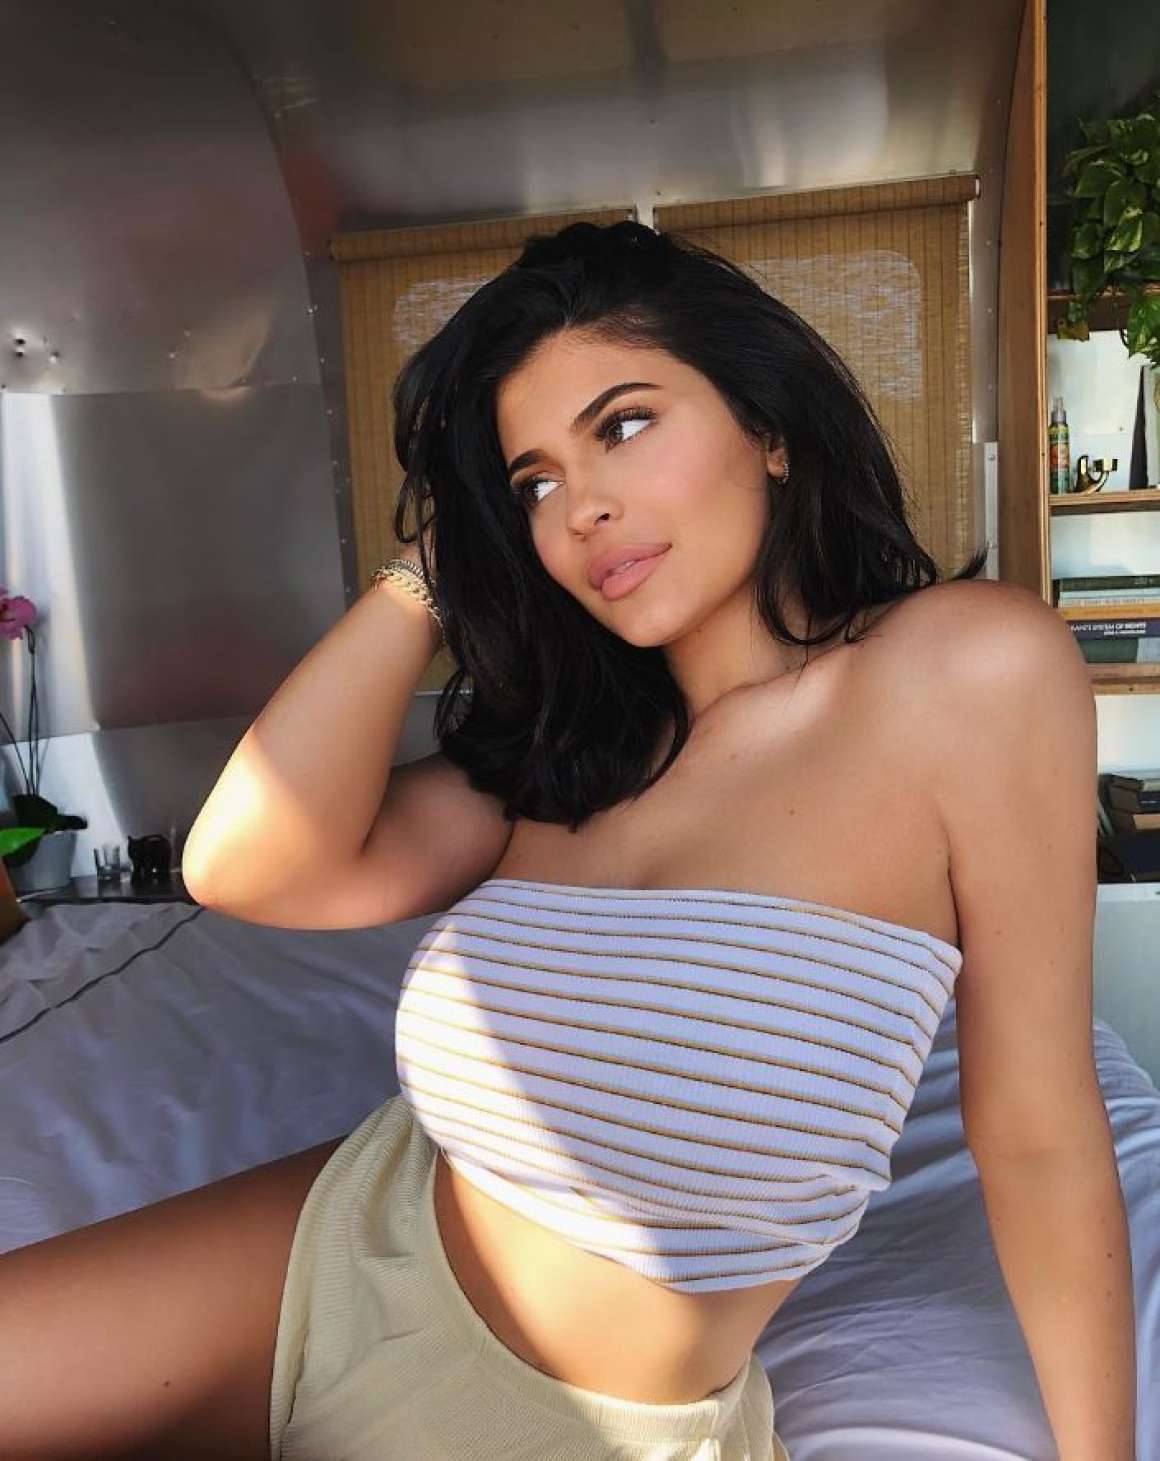 Kylie Jenner â€“ Hot Personal Pics